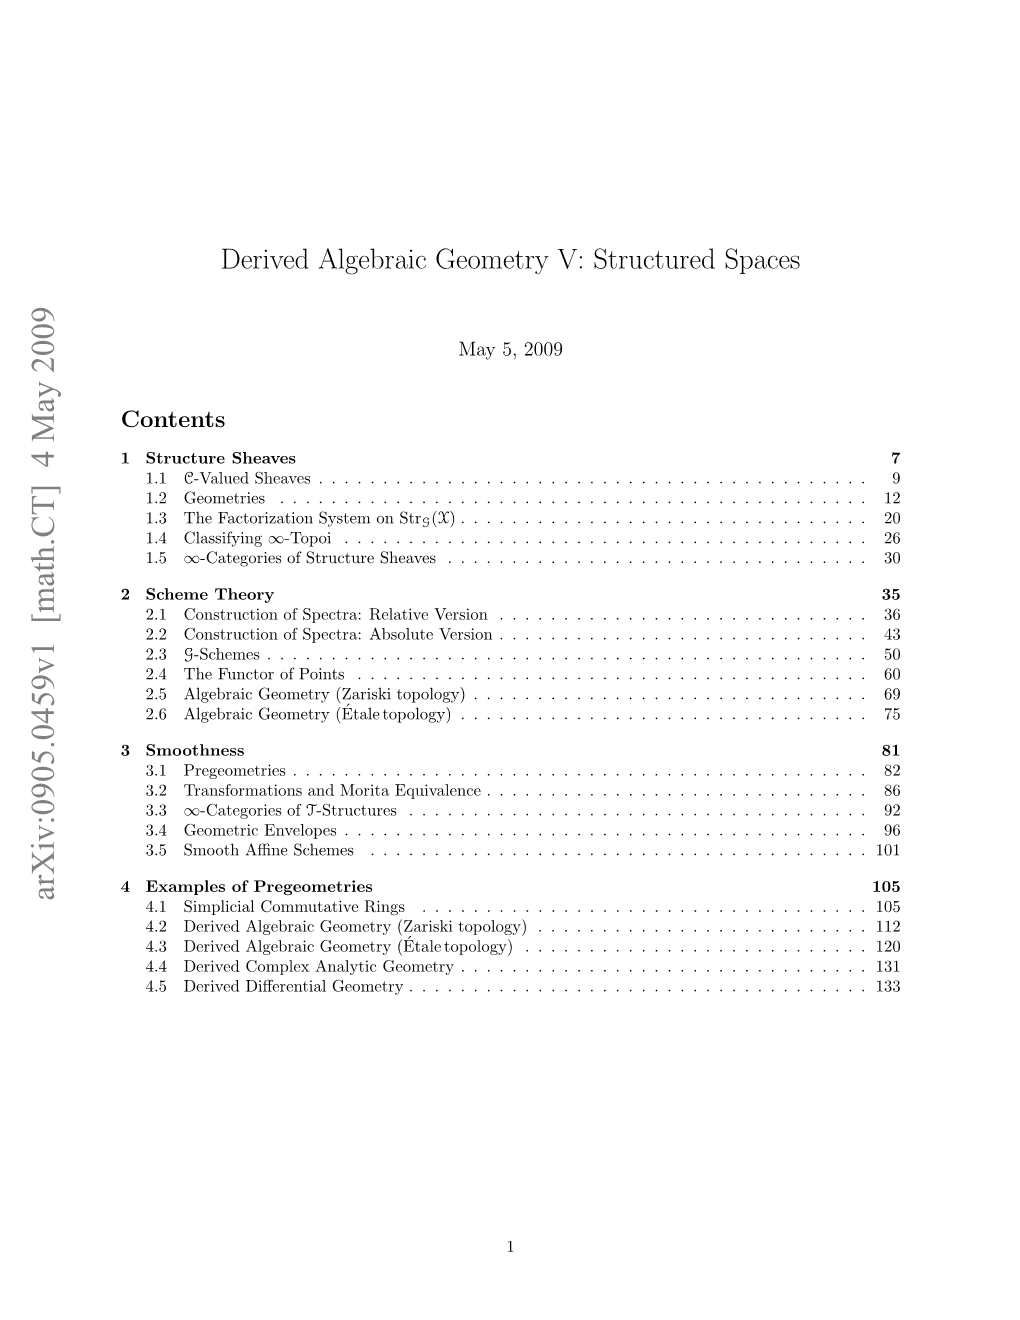 Derived Algebraic Geometry V: Structured Spaces